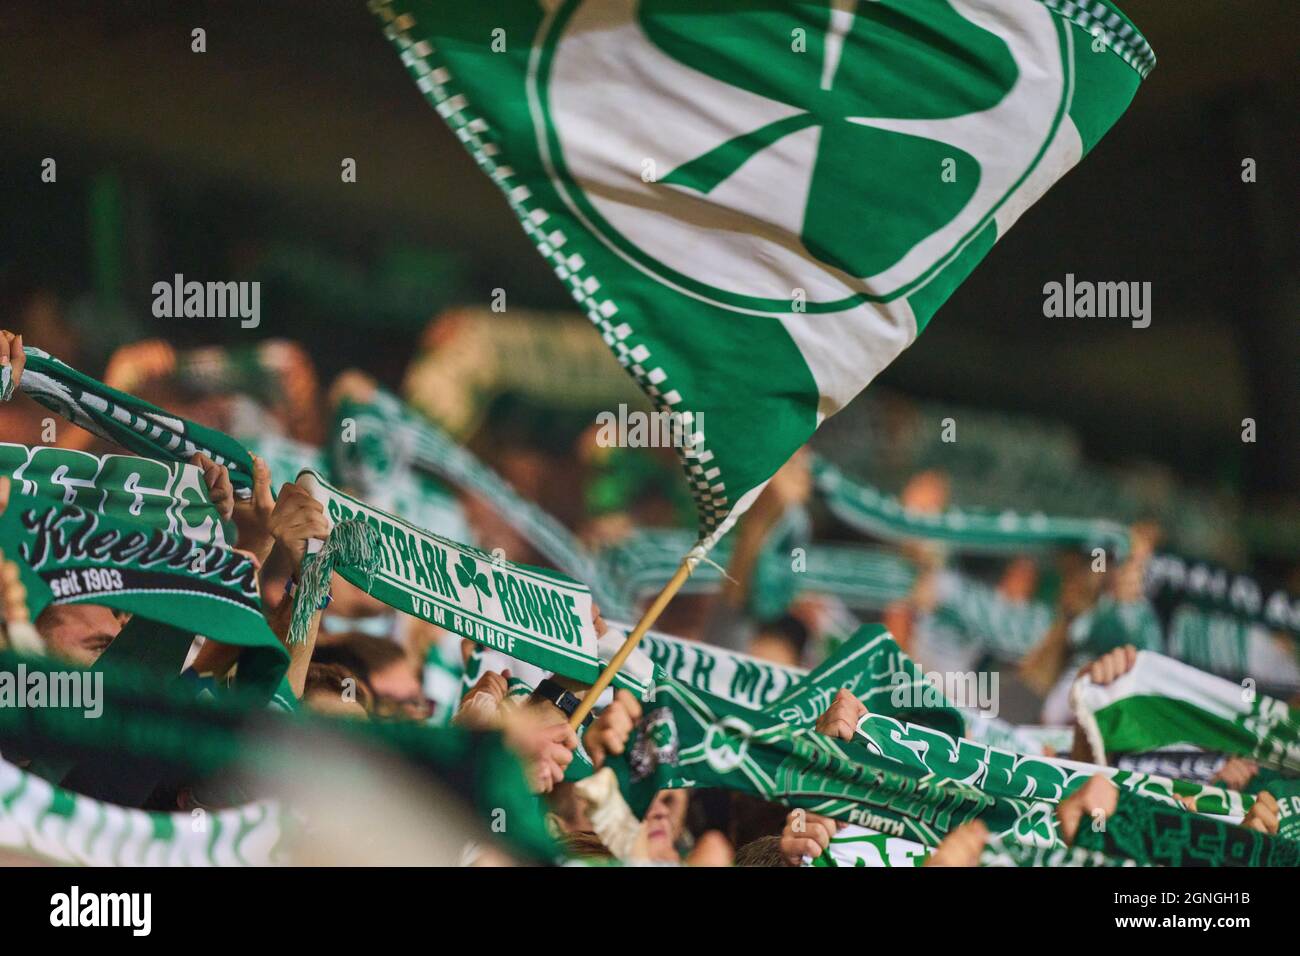 Fans Fürth in the match SpVgg GREUTHER FÜRTH - FC BAYERN MUENCHEN 1-3 1.German Football League on September 24, 2021 in Fuerth, Germany. Season 2021/2022, matchday 7, 1.Bundesliga, FCB, München, 7.Spieltag. © Peter Schatz / Alamy Live News    - DFL REGULATIONS PROHIBIT ANY USE OF PHOTOGRAPHS as IMAGE SEQUENCES and/or QUASI-VIDEO - Stock Photo